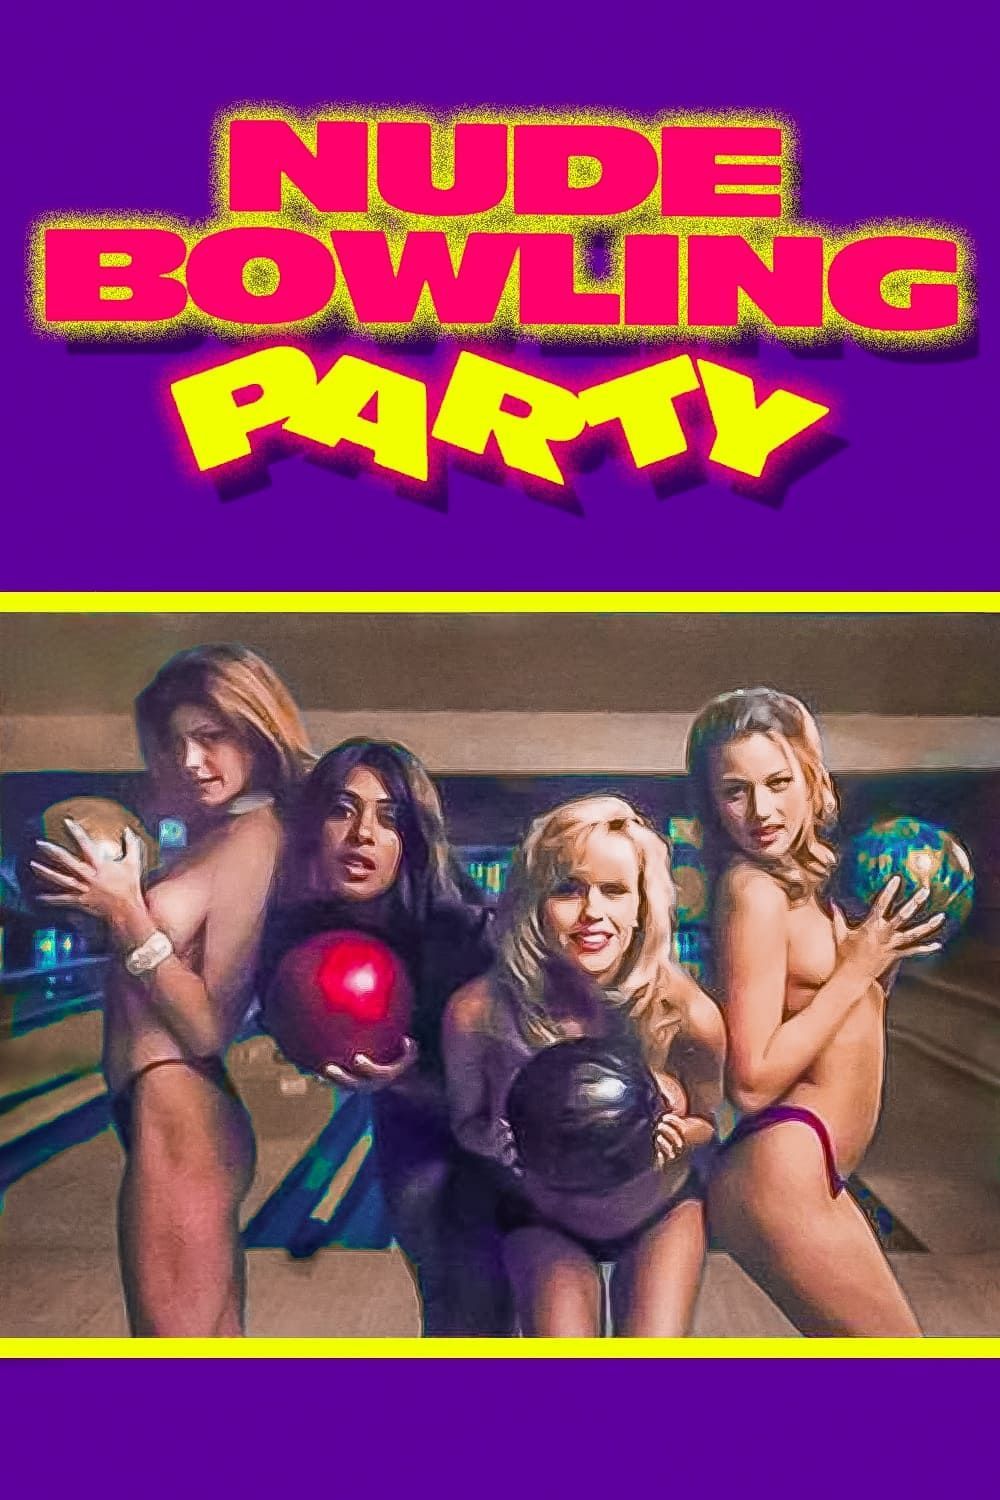 dedo adm share bowling in the nude photos